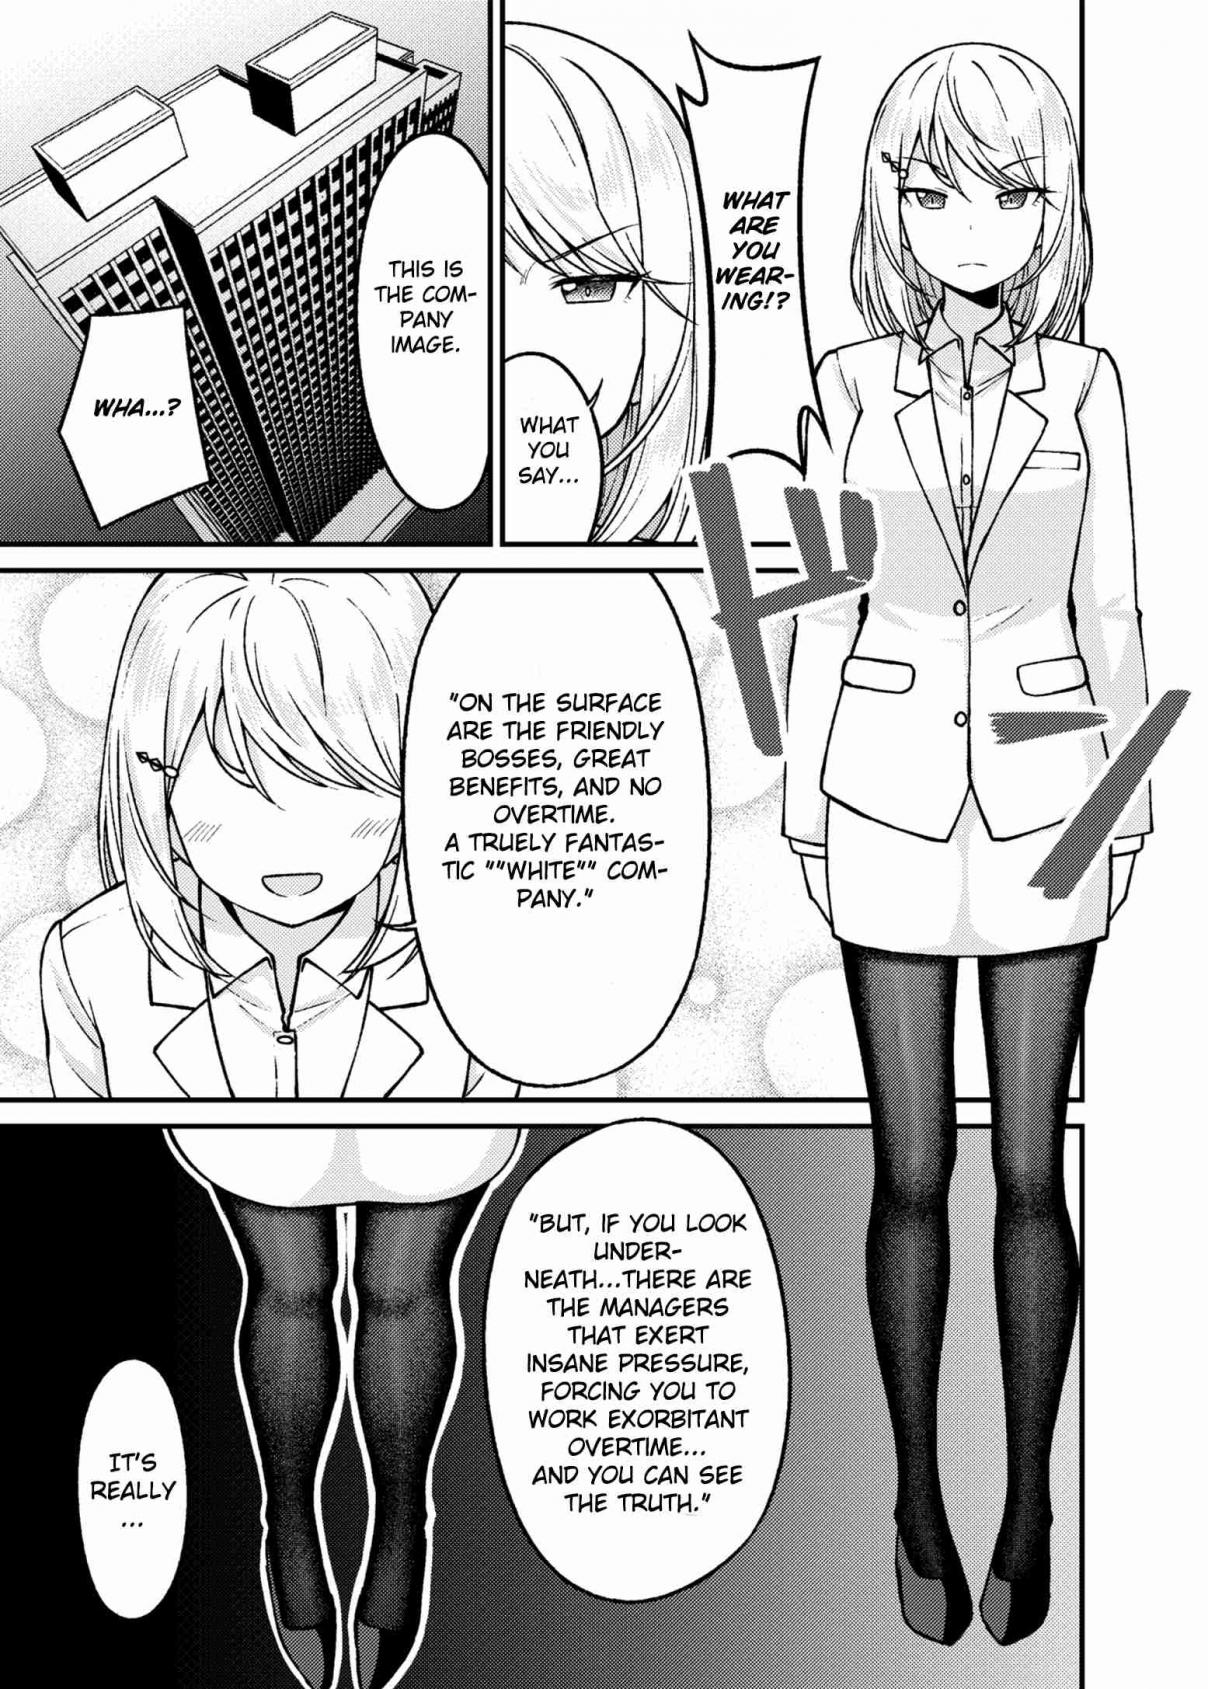 A Wife Who Heals with Tights Ch. 8.5 Their Past